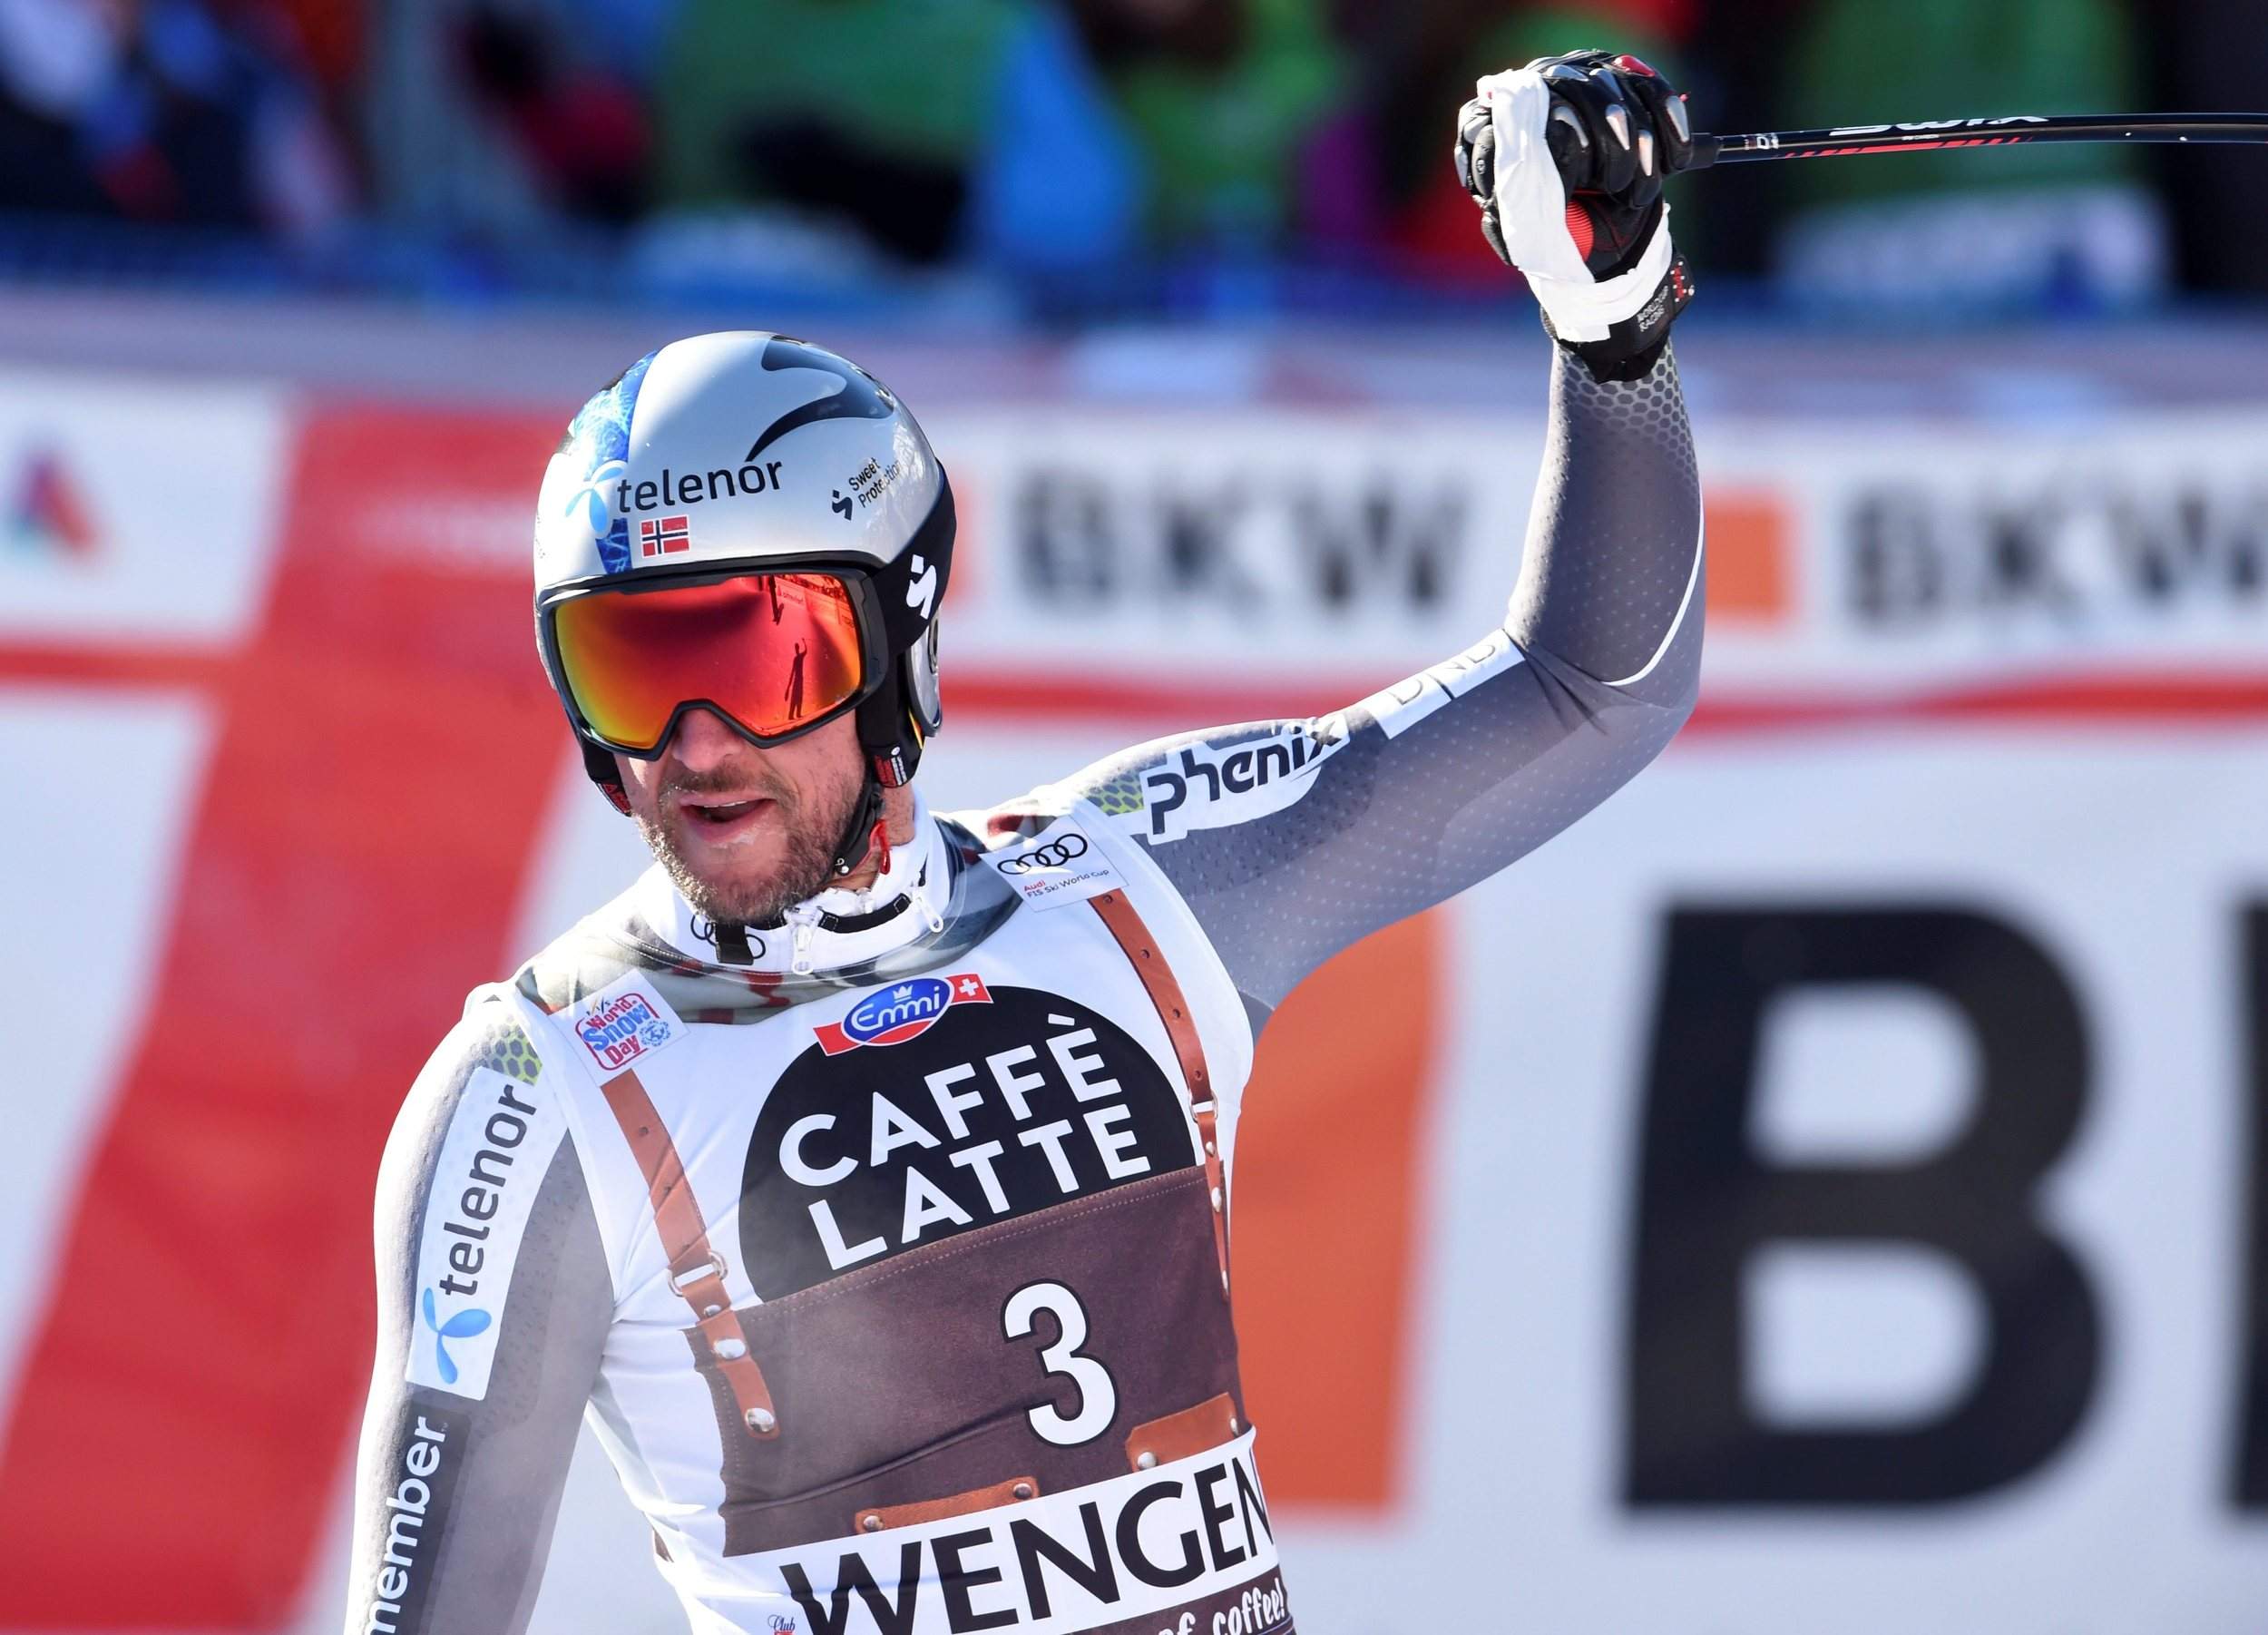 Aksel Lund Svindal is to retire after the World’s Championship